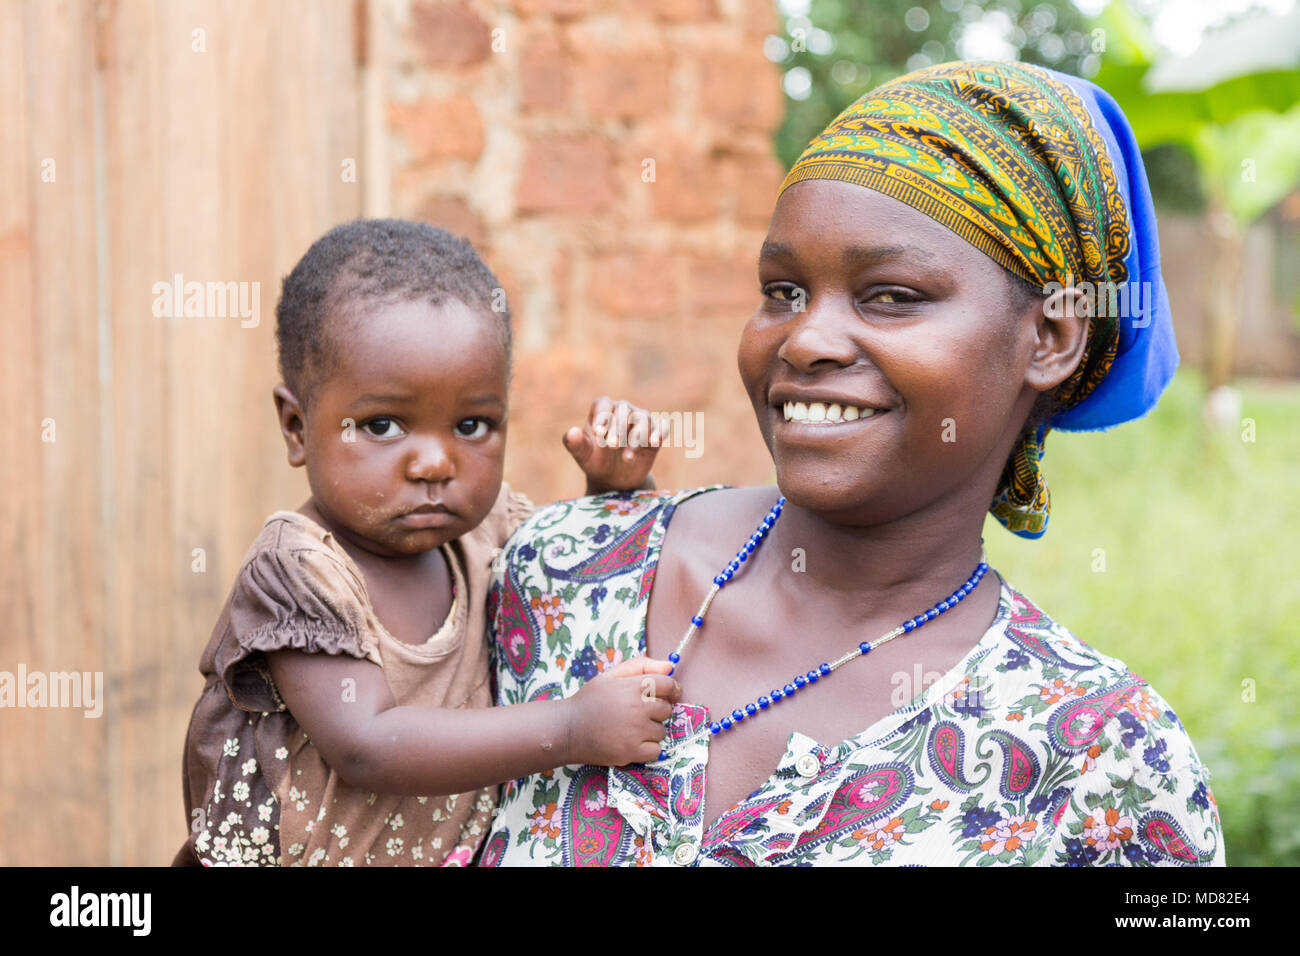 Uganda. June 09 2017. A happy and smiling young African woman holding her child in her arms. Stock Photo